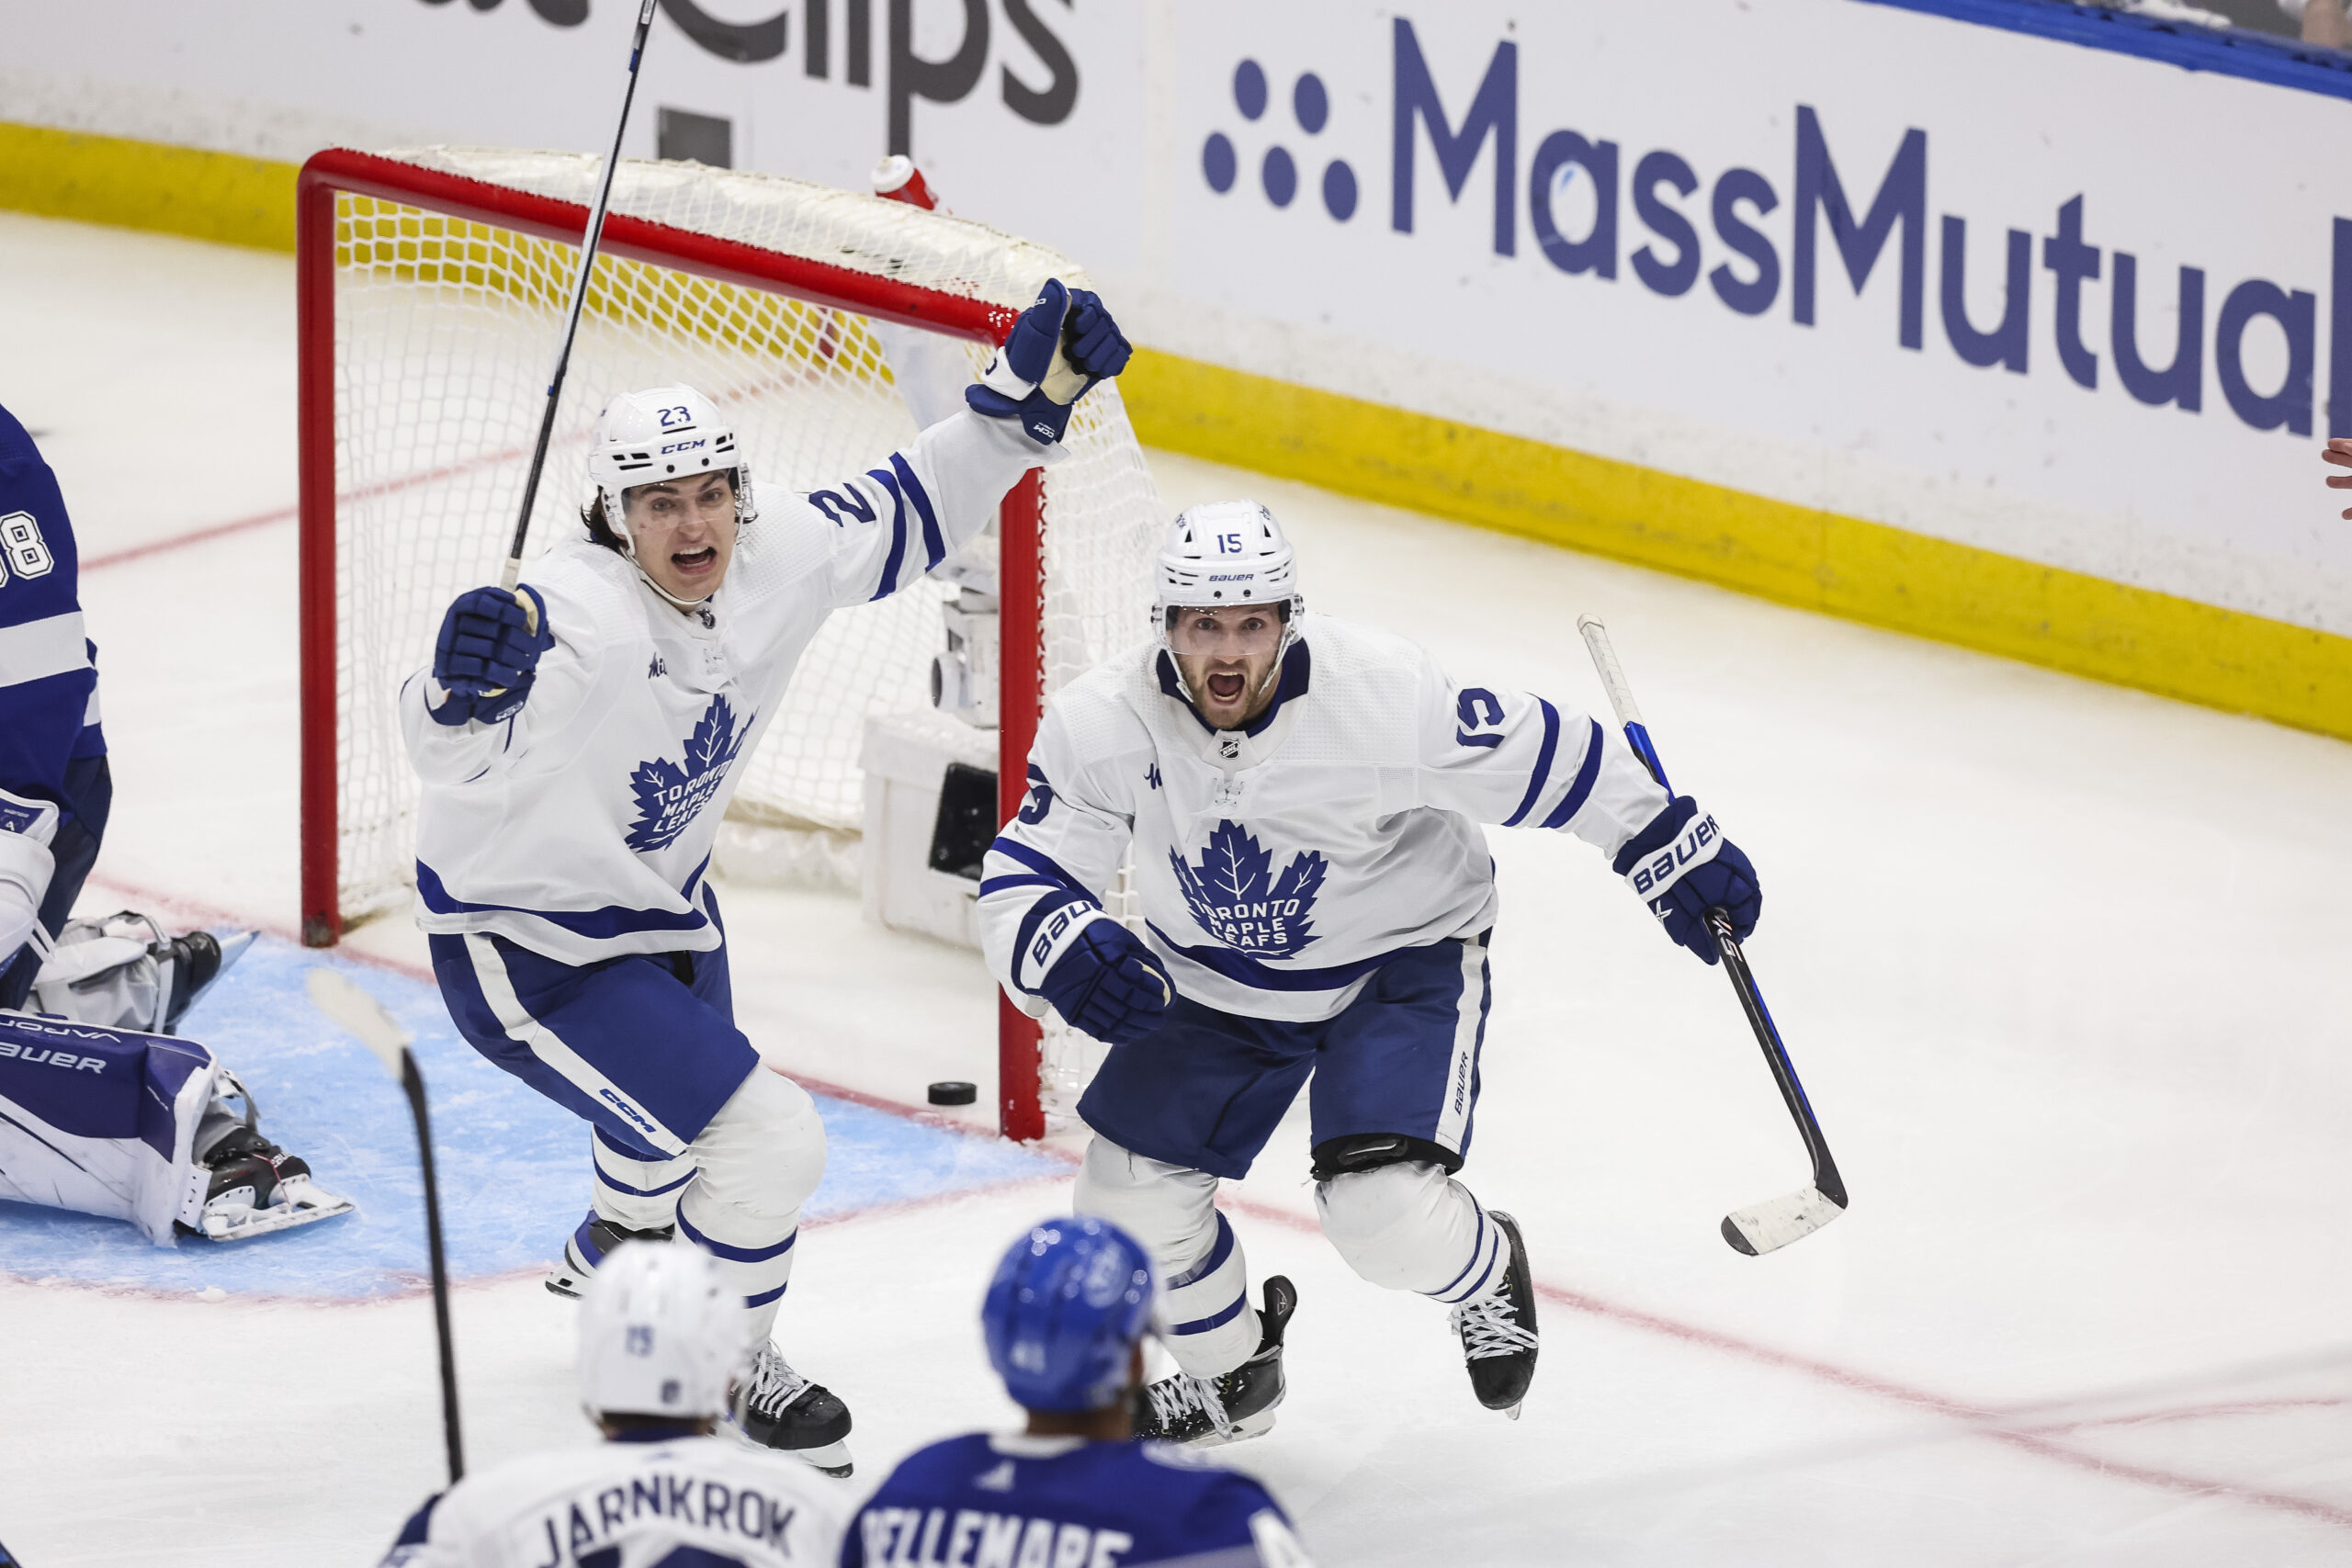 NHL playoffs: Devils-Rangers, Bolts-Leafs highlight openers